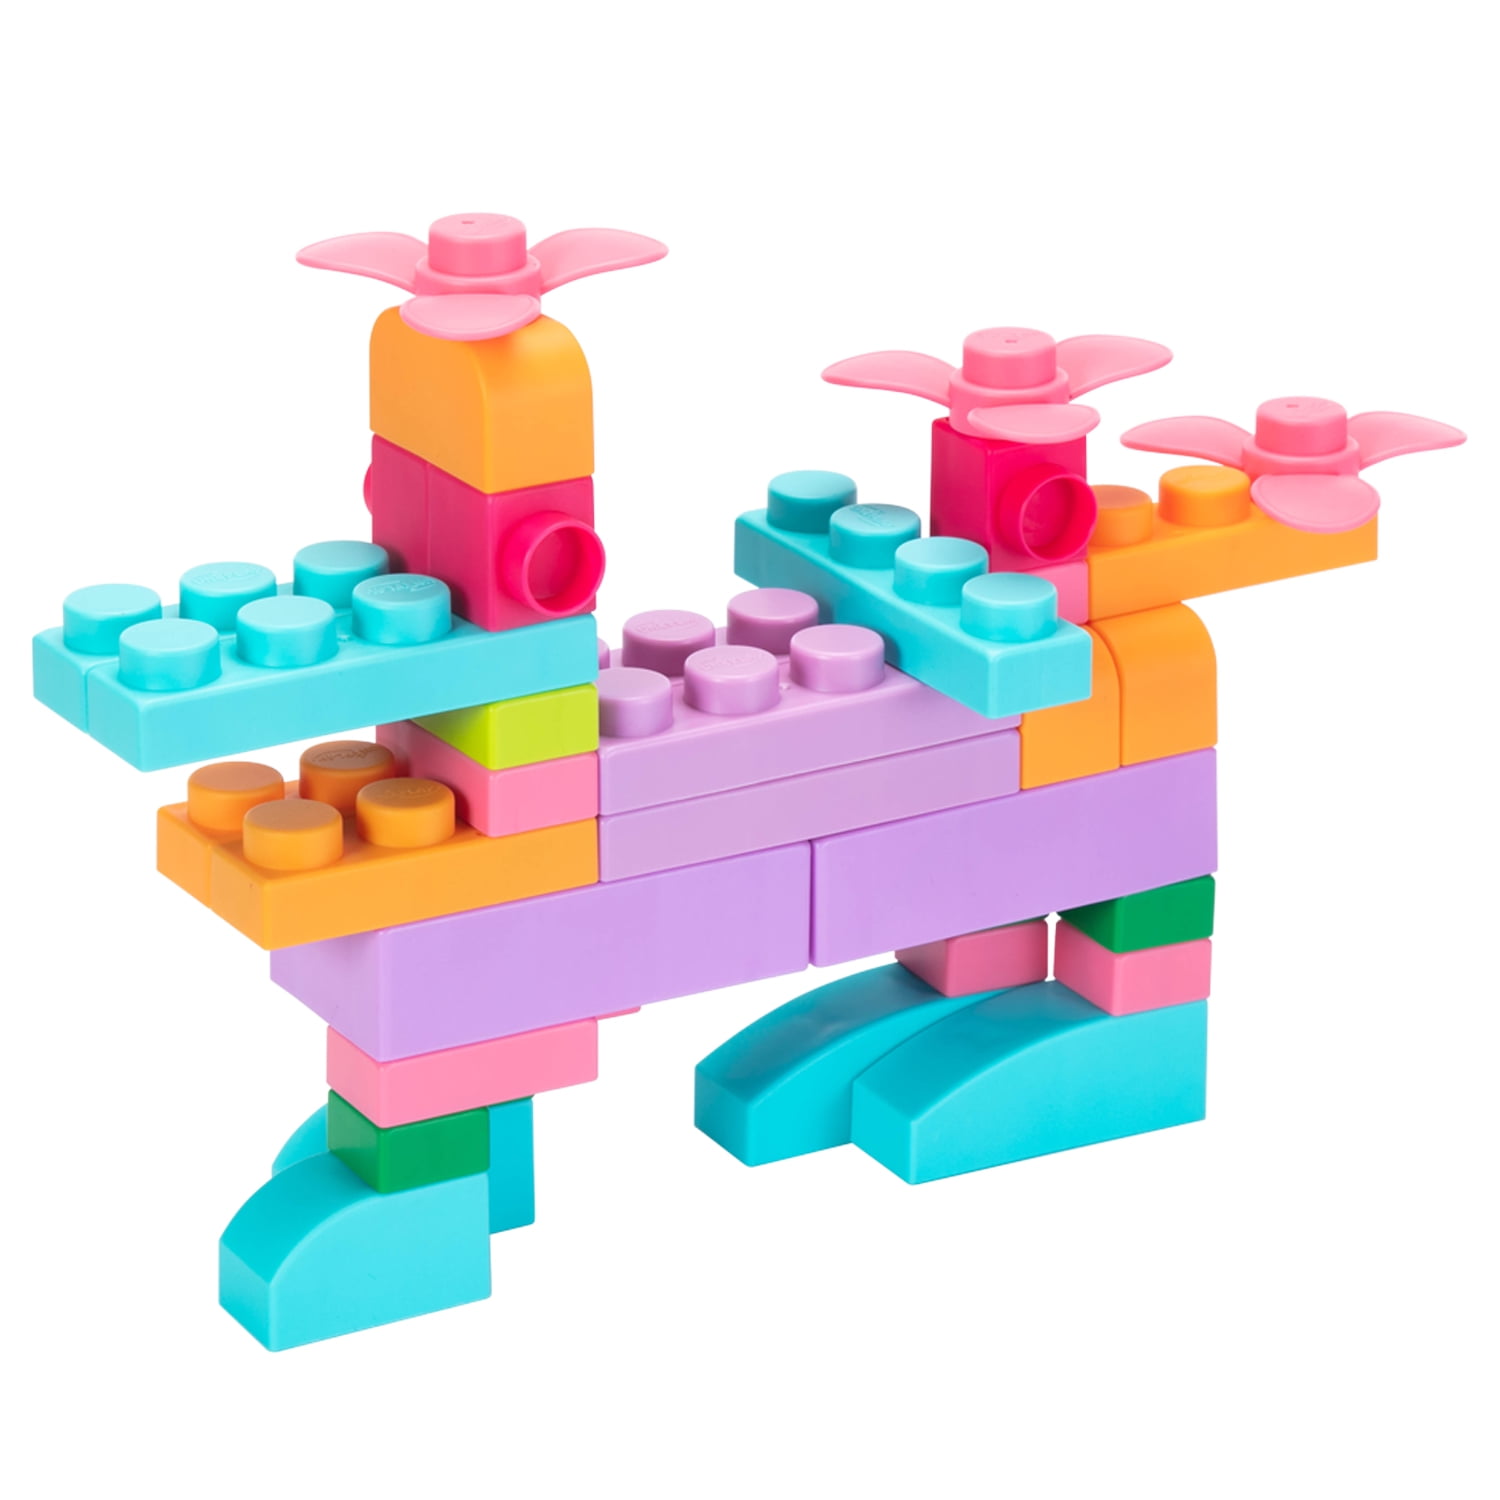 Early Learning Stacking Blocks for Infants and Toddlers Cognitive Development UNiPLAY Plus Soft Building Blocks — Creativity Toy 80-Piece Set Pink Educational Play 